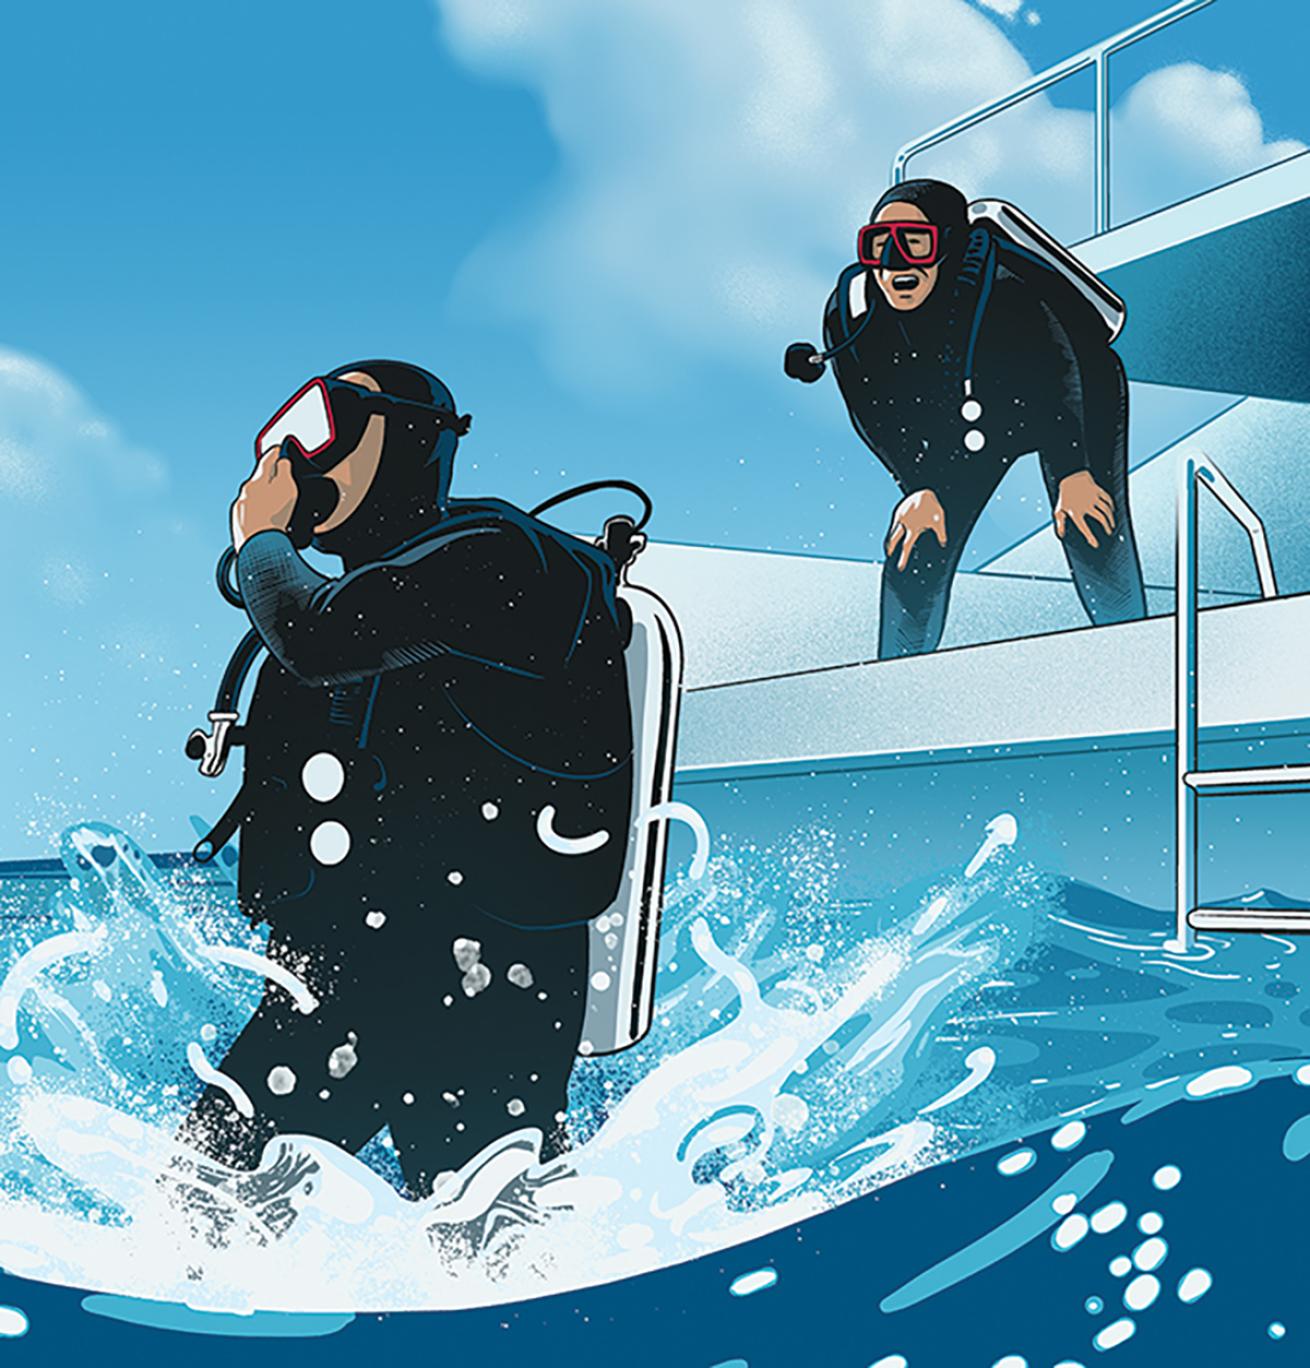 Illustration of a diver jumping into the ocean from a liveaboard.